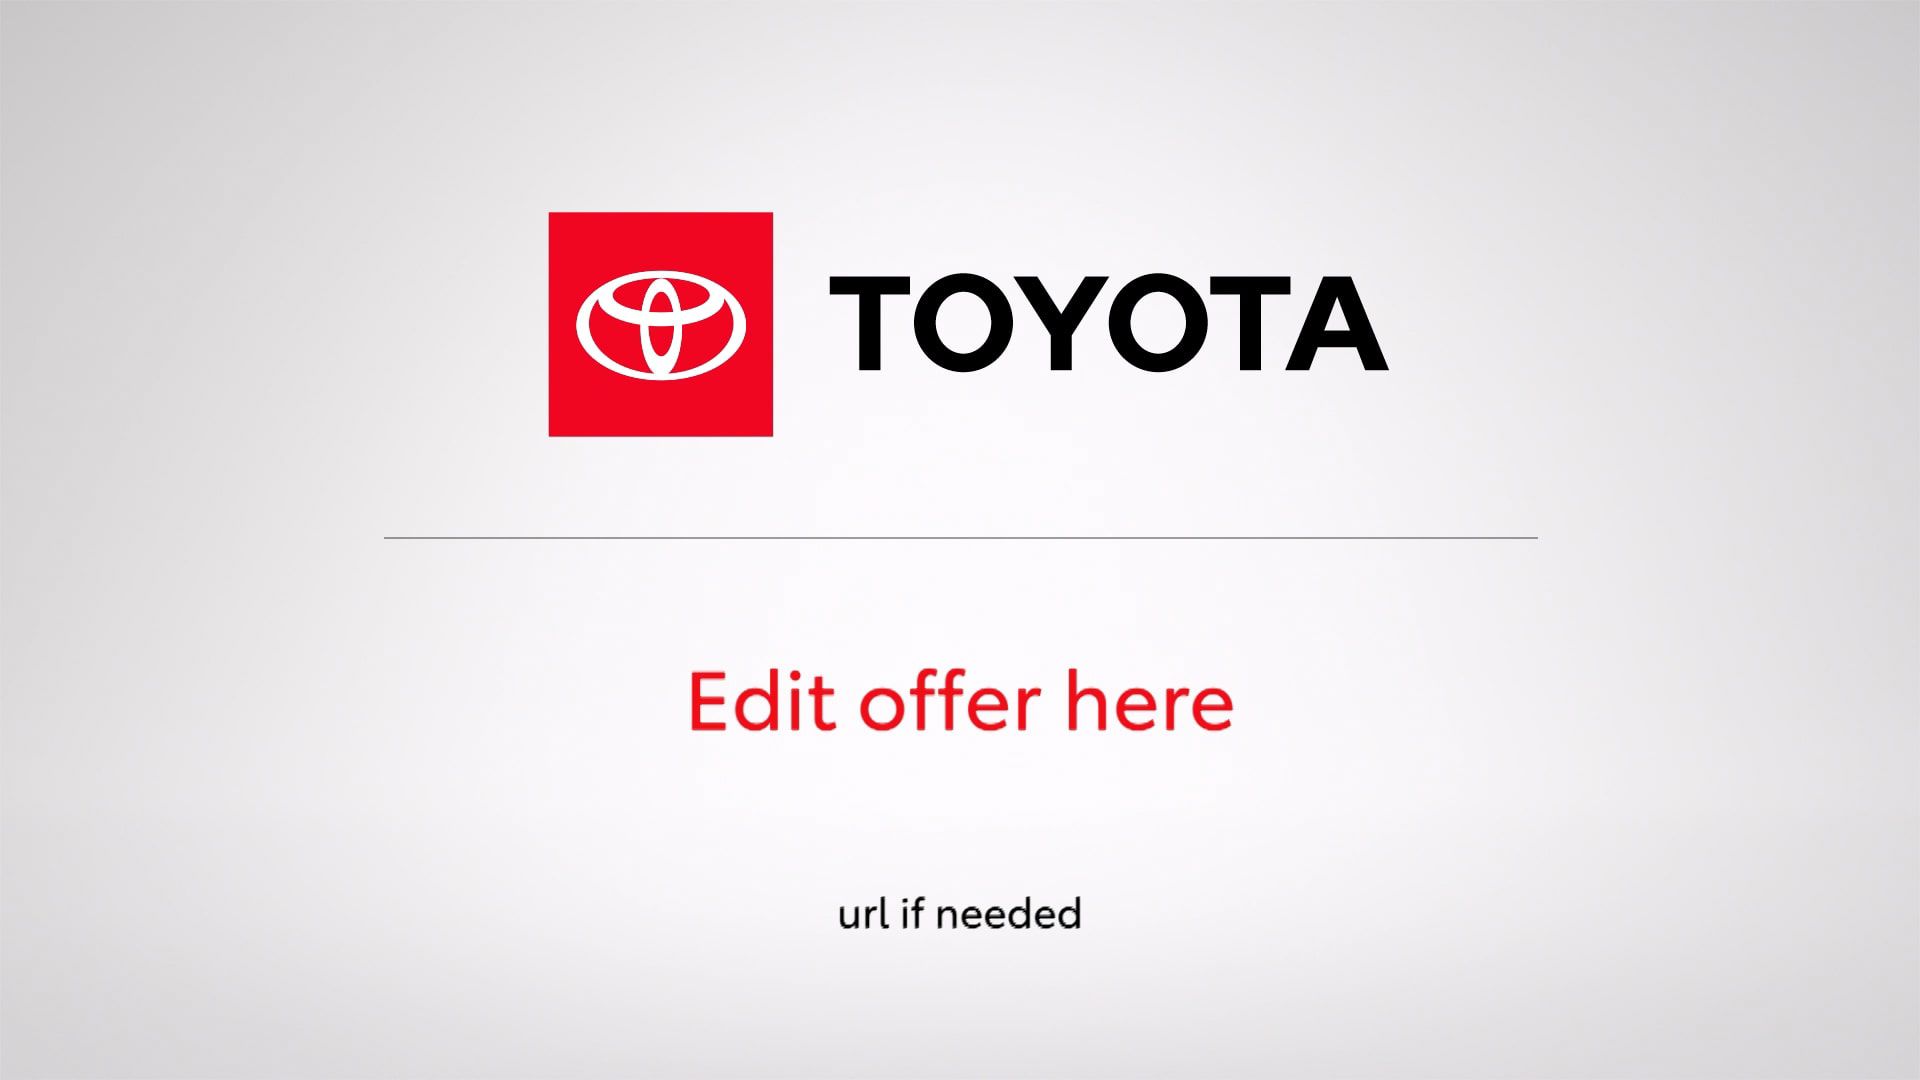 Half-screen end tag with Toyota logo and text that reads “Edit offer here” and “url if needed.”